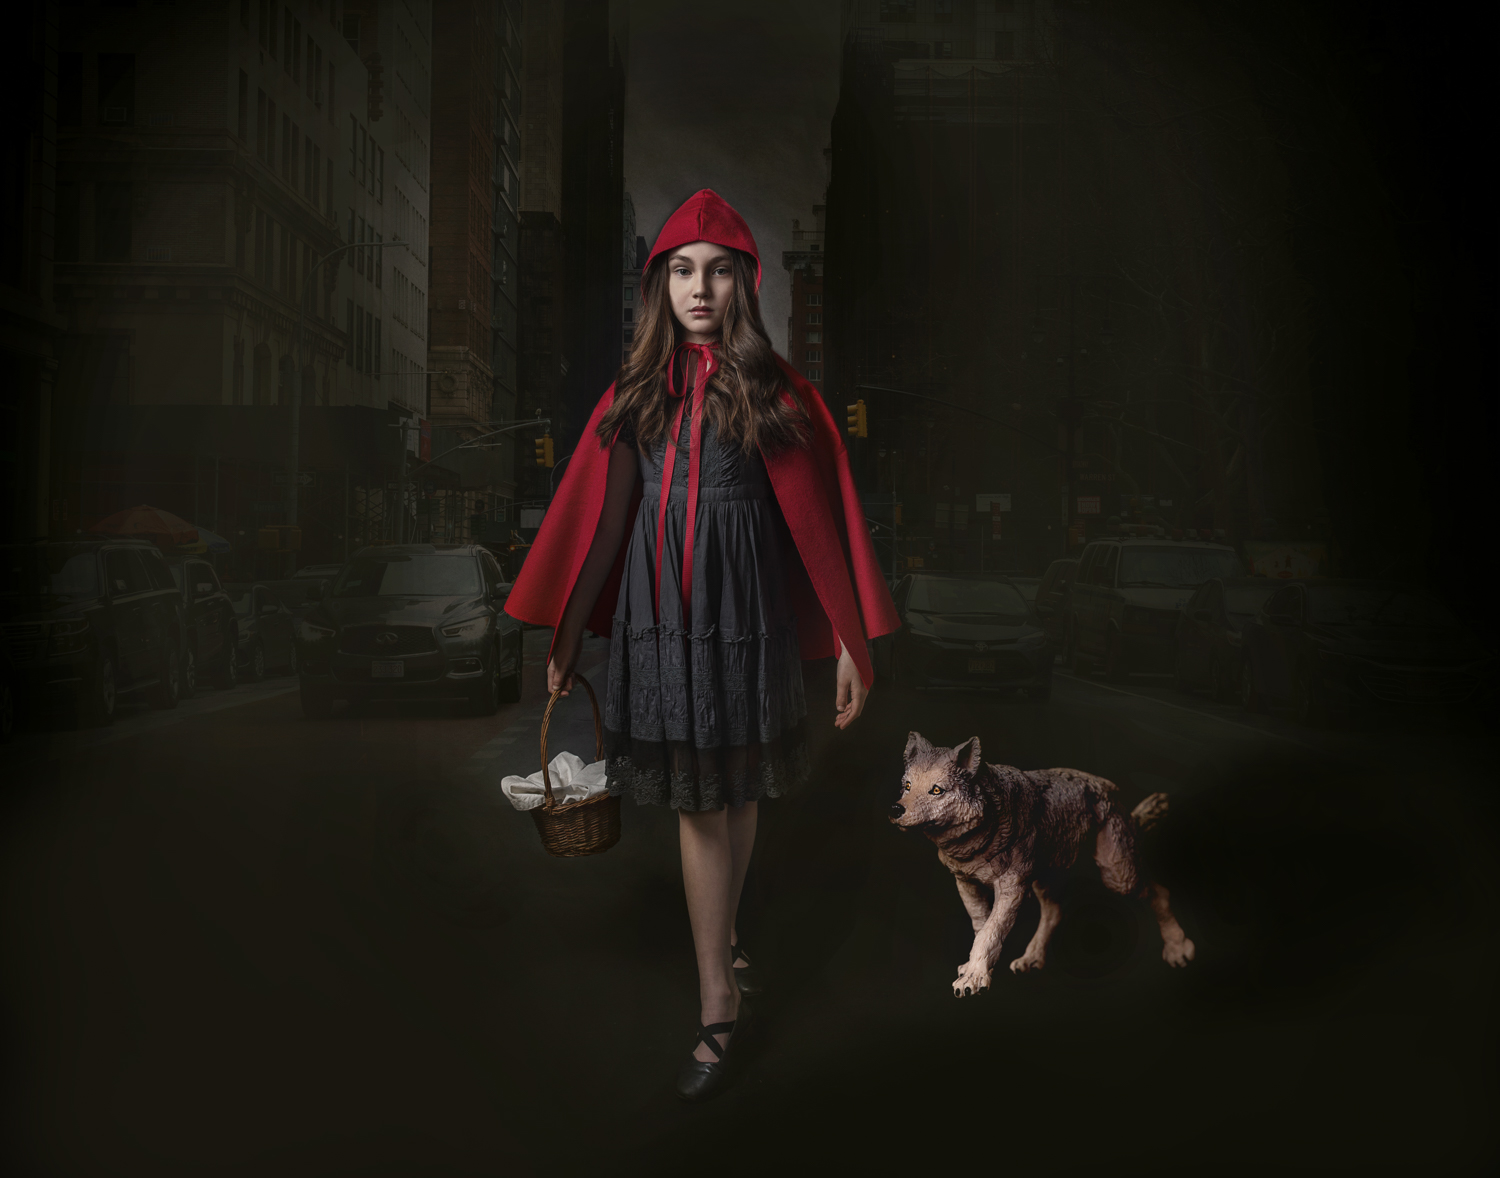 Little red riding hood in the city